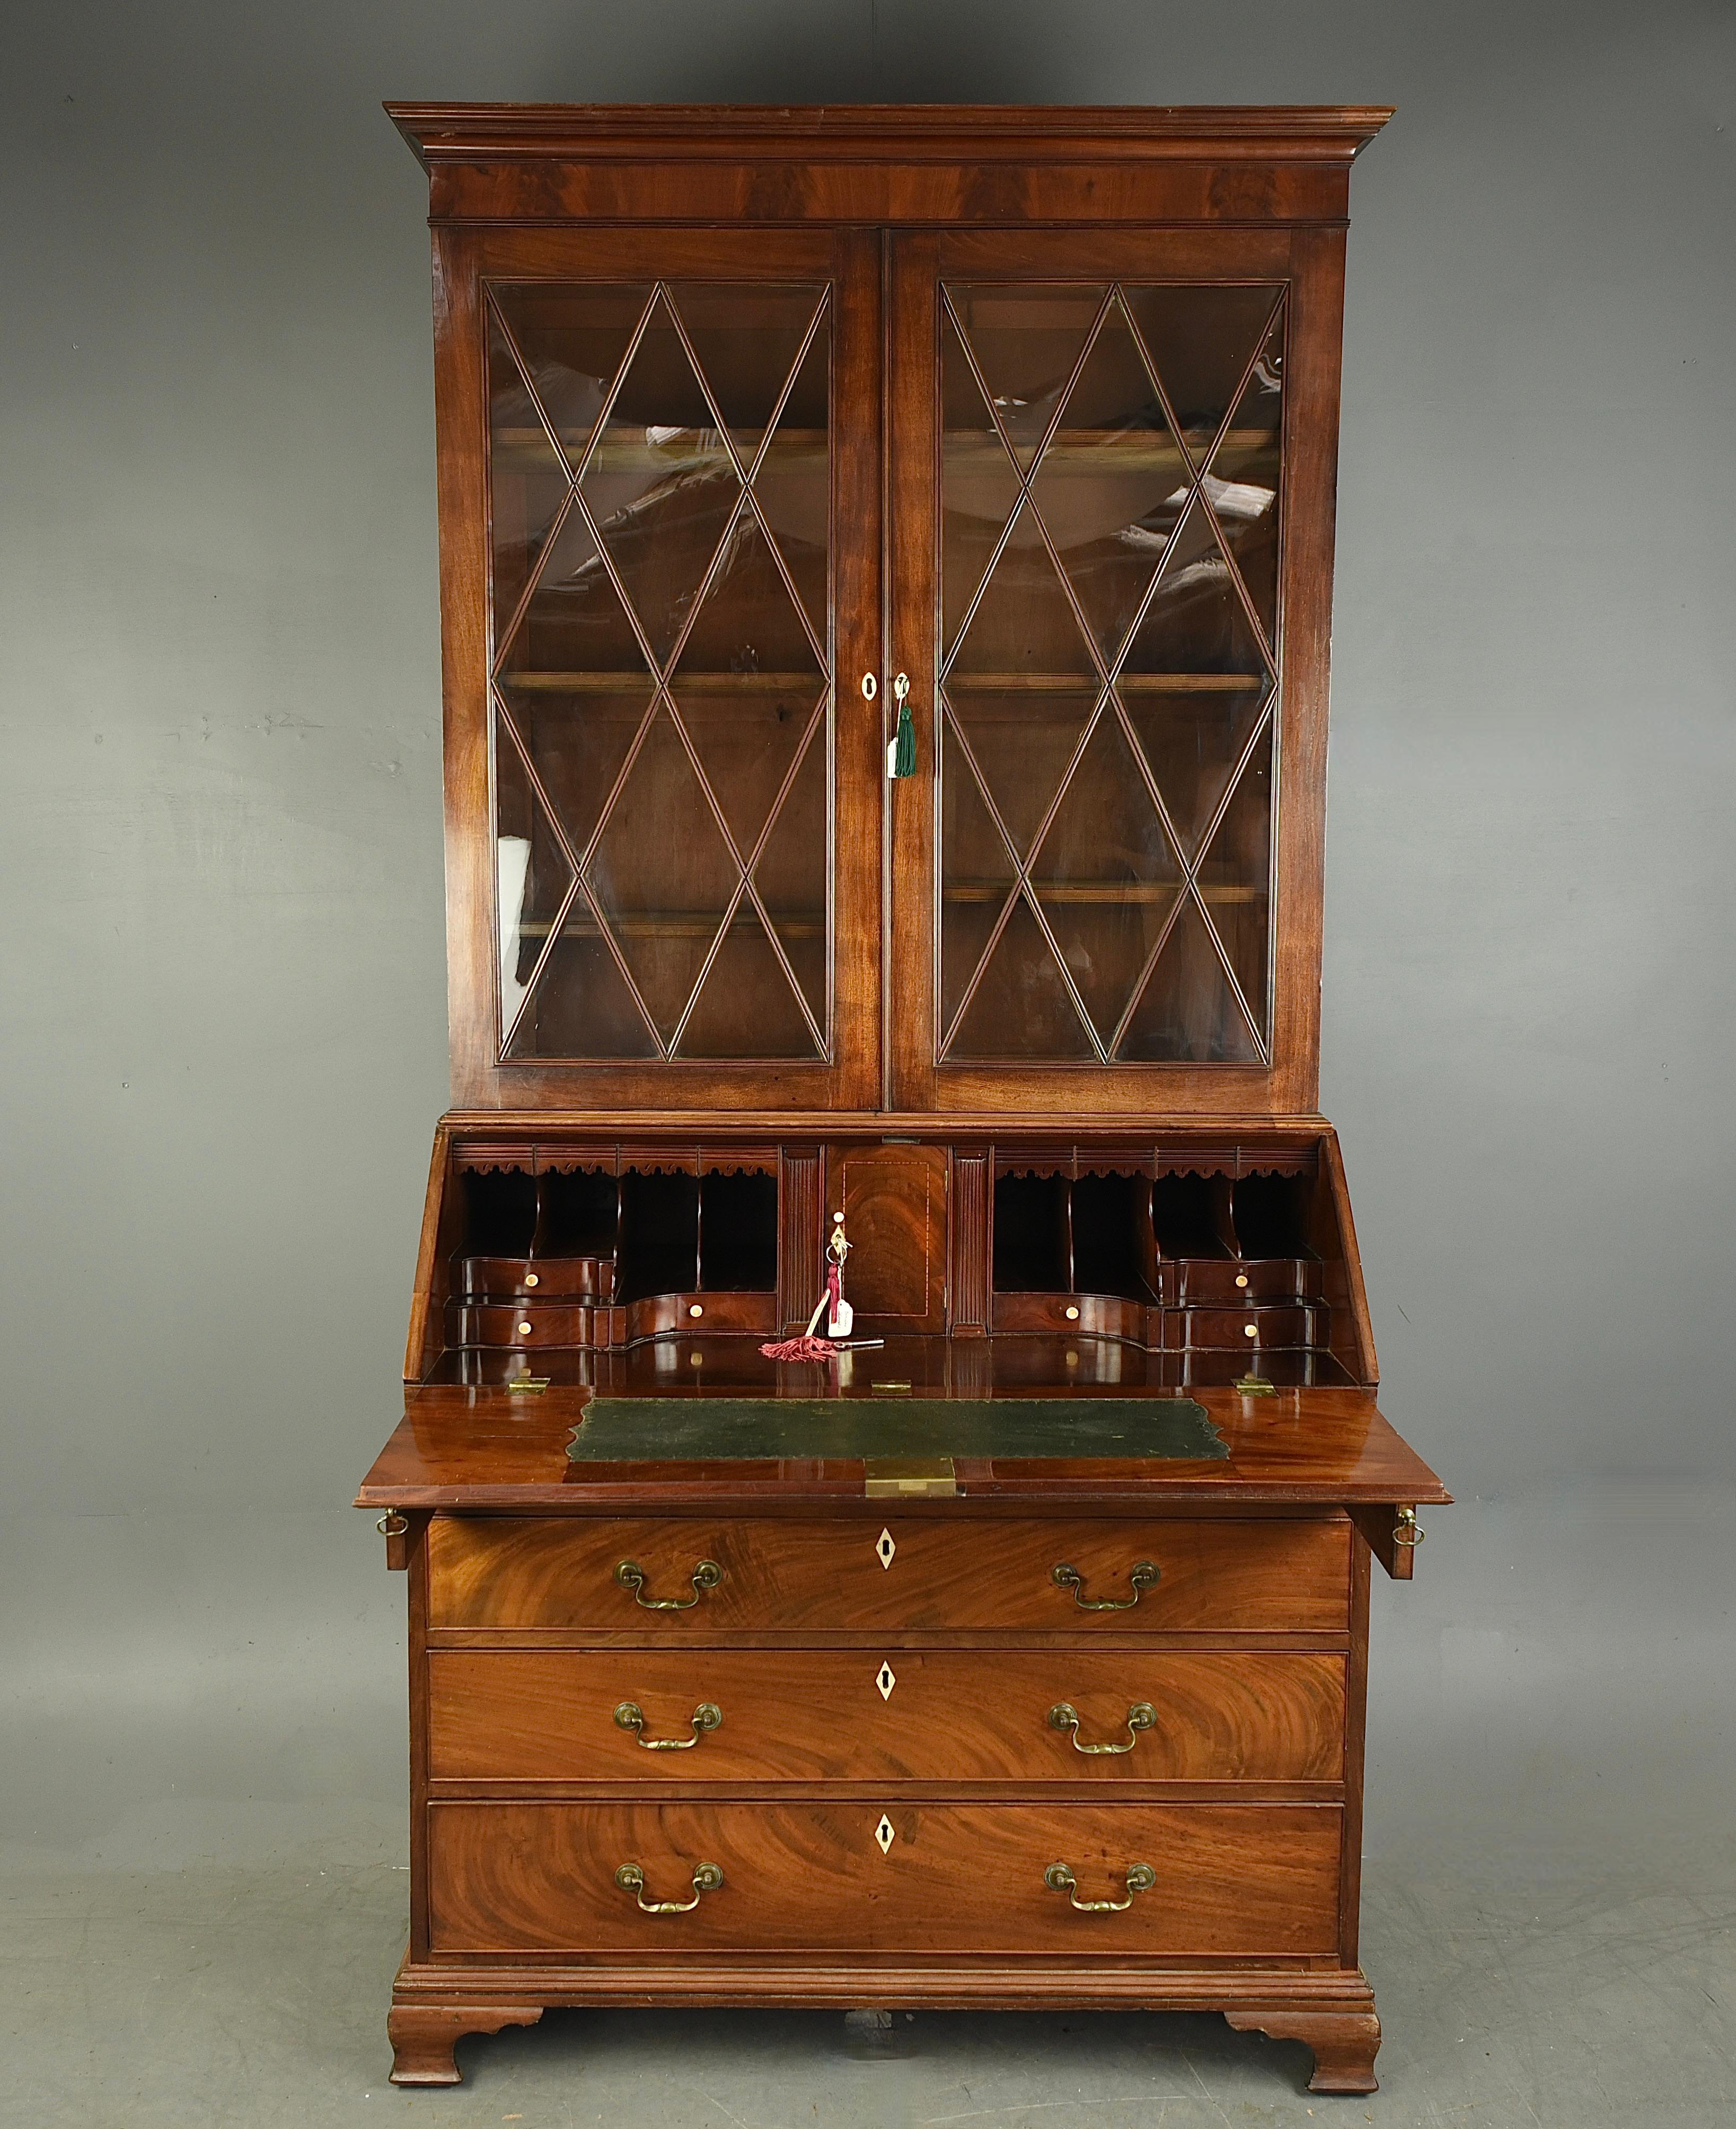 A very hansom early Georgian mahogany bureau bookcase .
The top has 6 fully adjustable shelves and quality glazed doors .
The bureau has a wonderful fitted interior with serpentine drawers and 6 secret drawers in total and a central cupboard and a